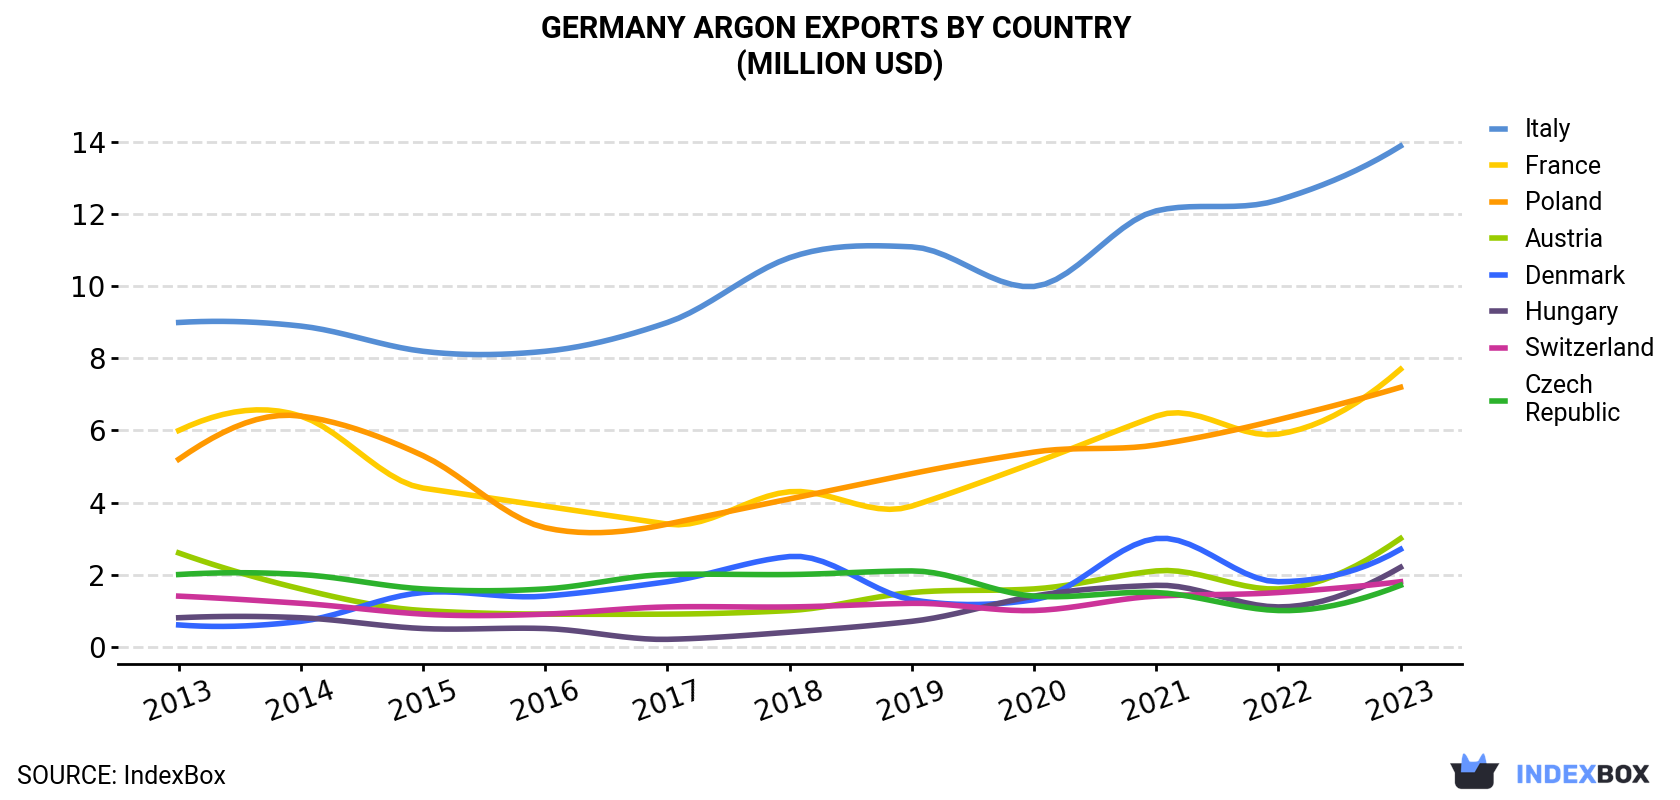 Germany Argon Exports By Country (Million USD)